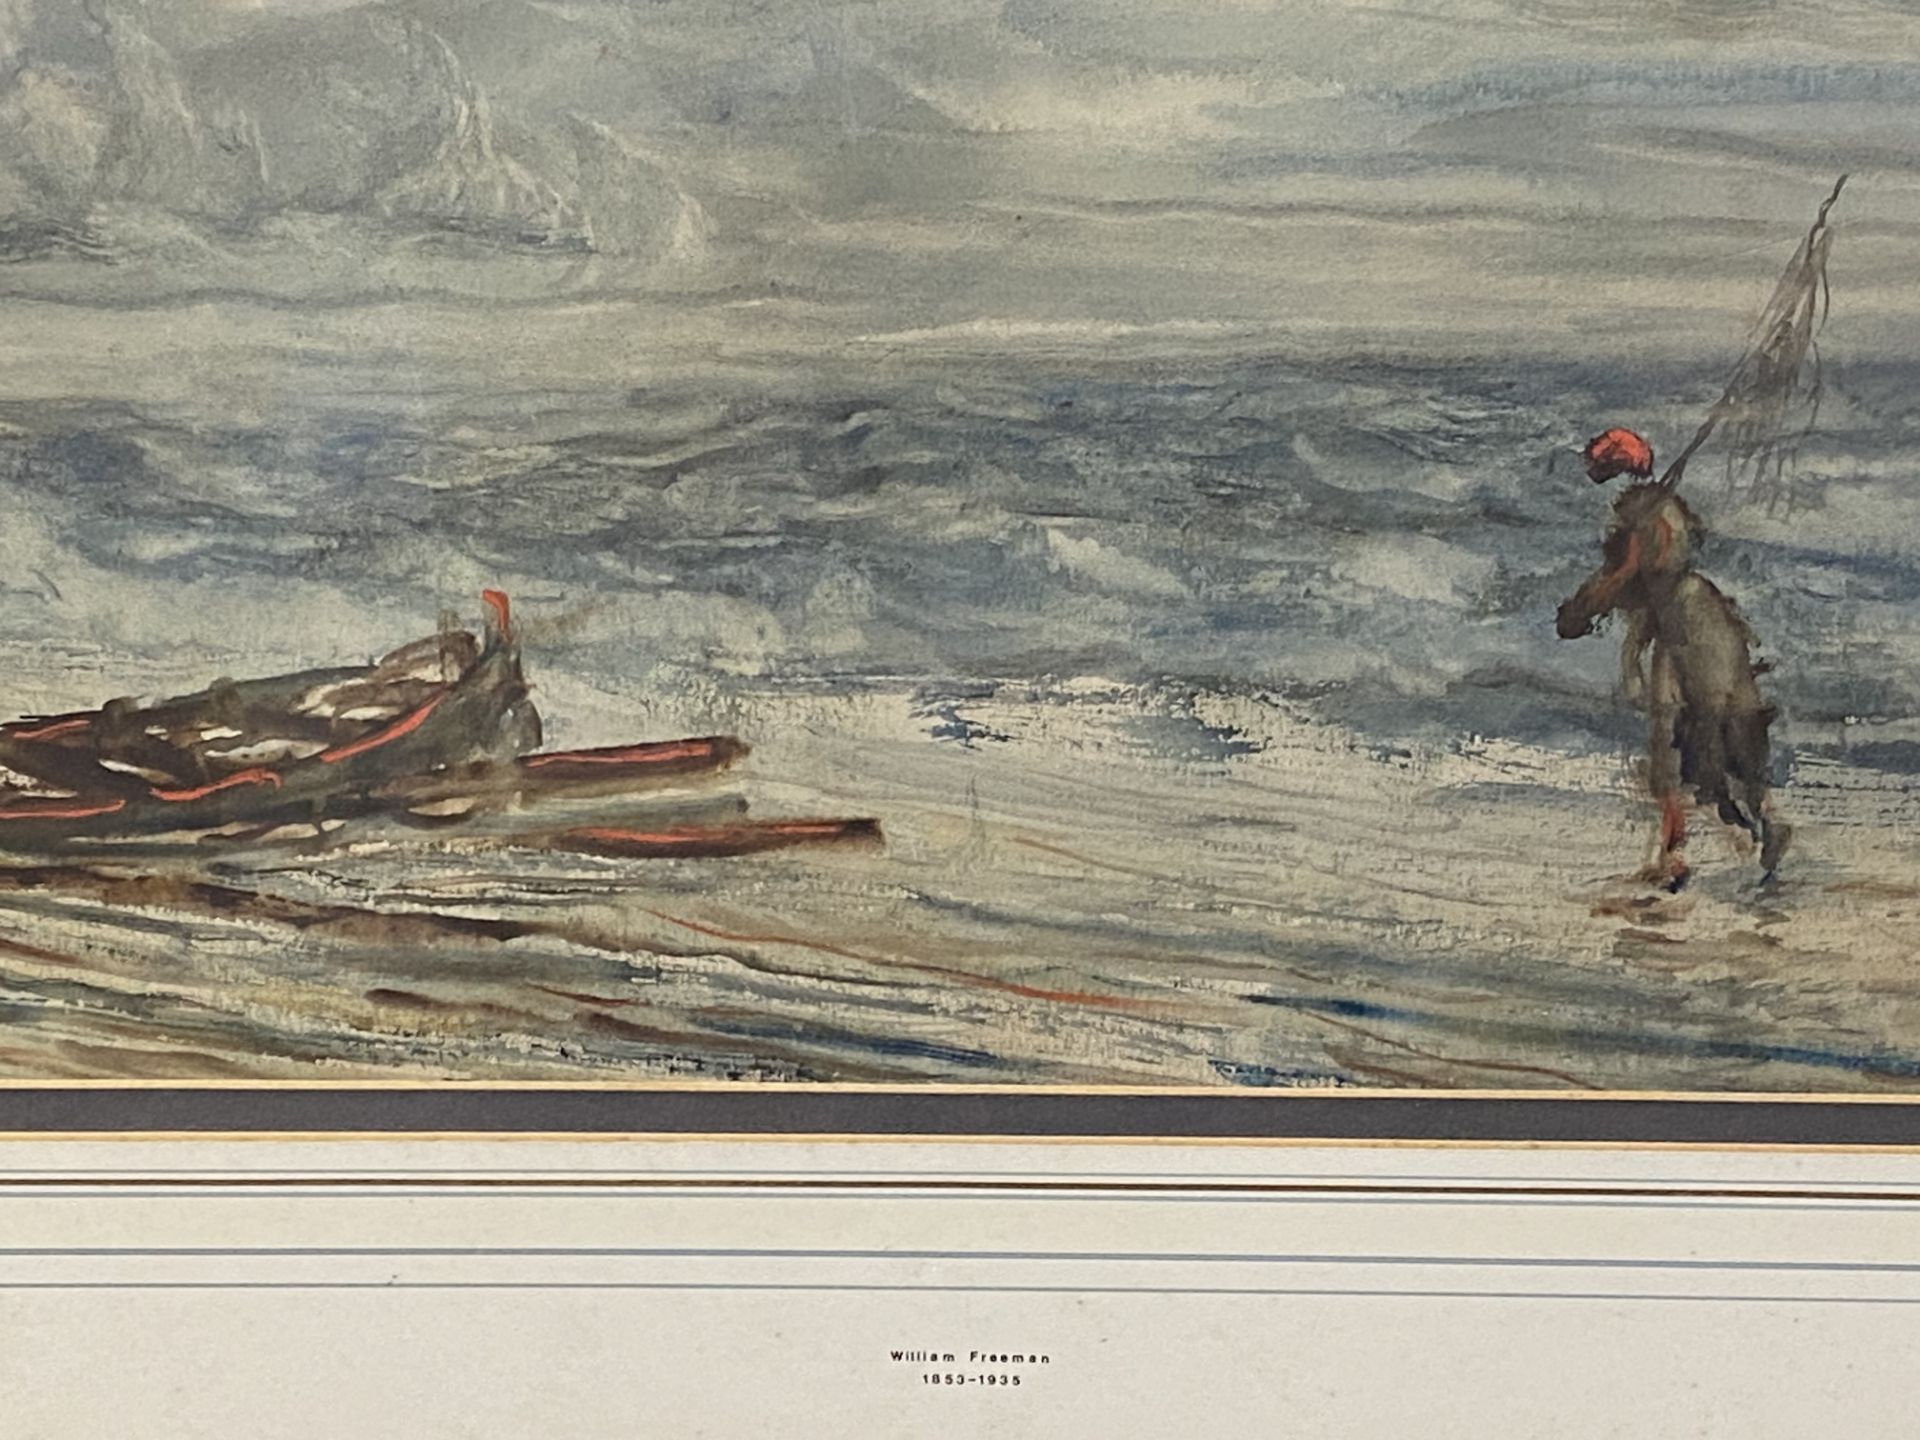 Framed and glazed watercolour of a fisherman on the seashore - Image 4 of 4